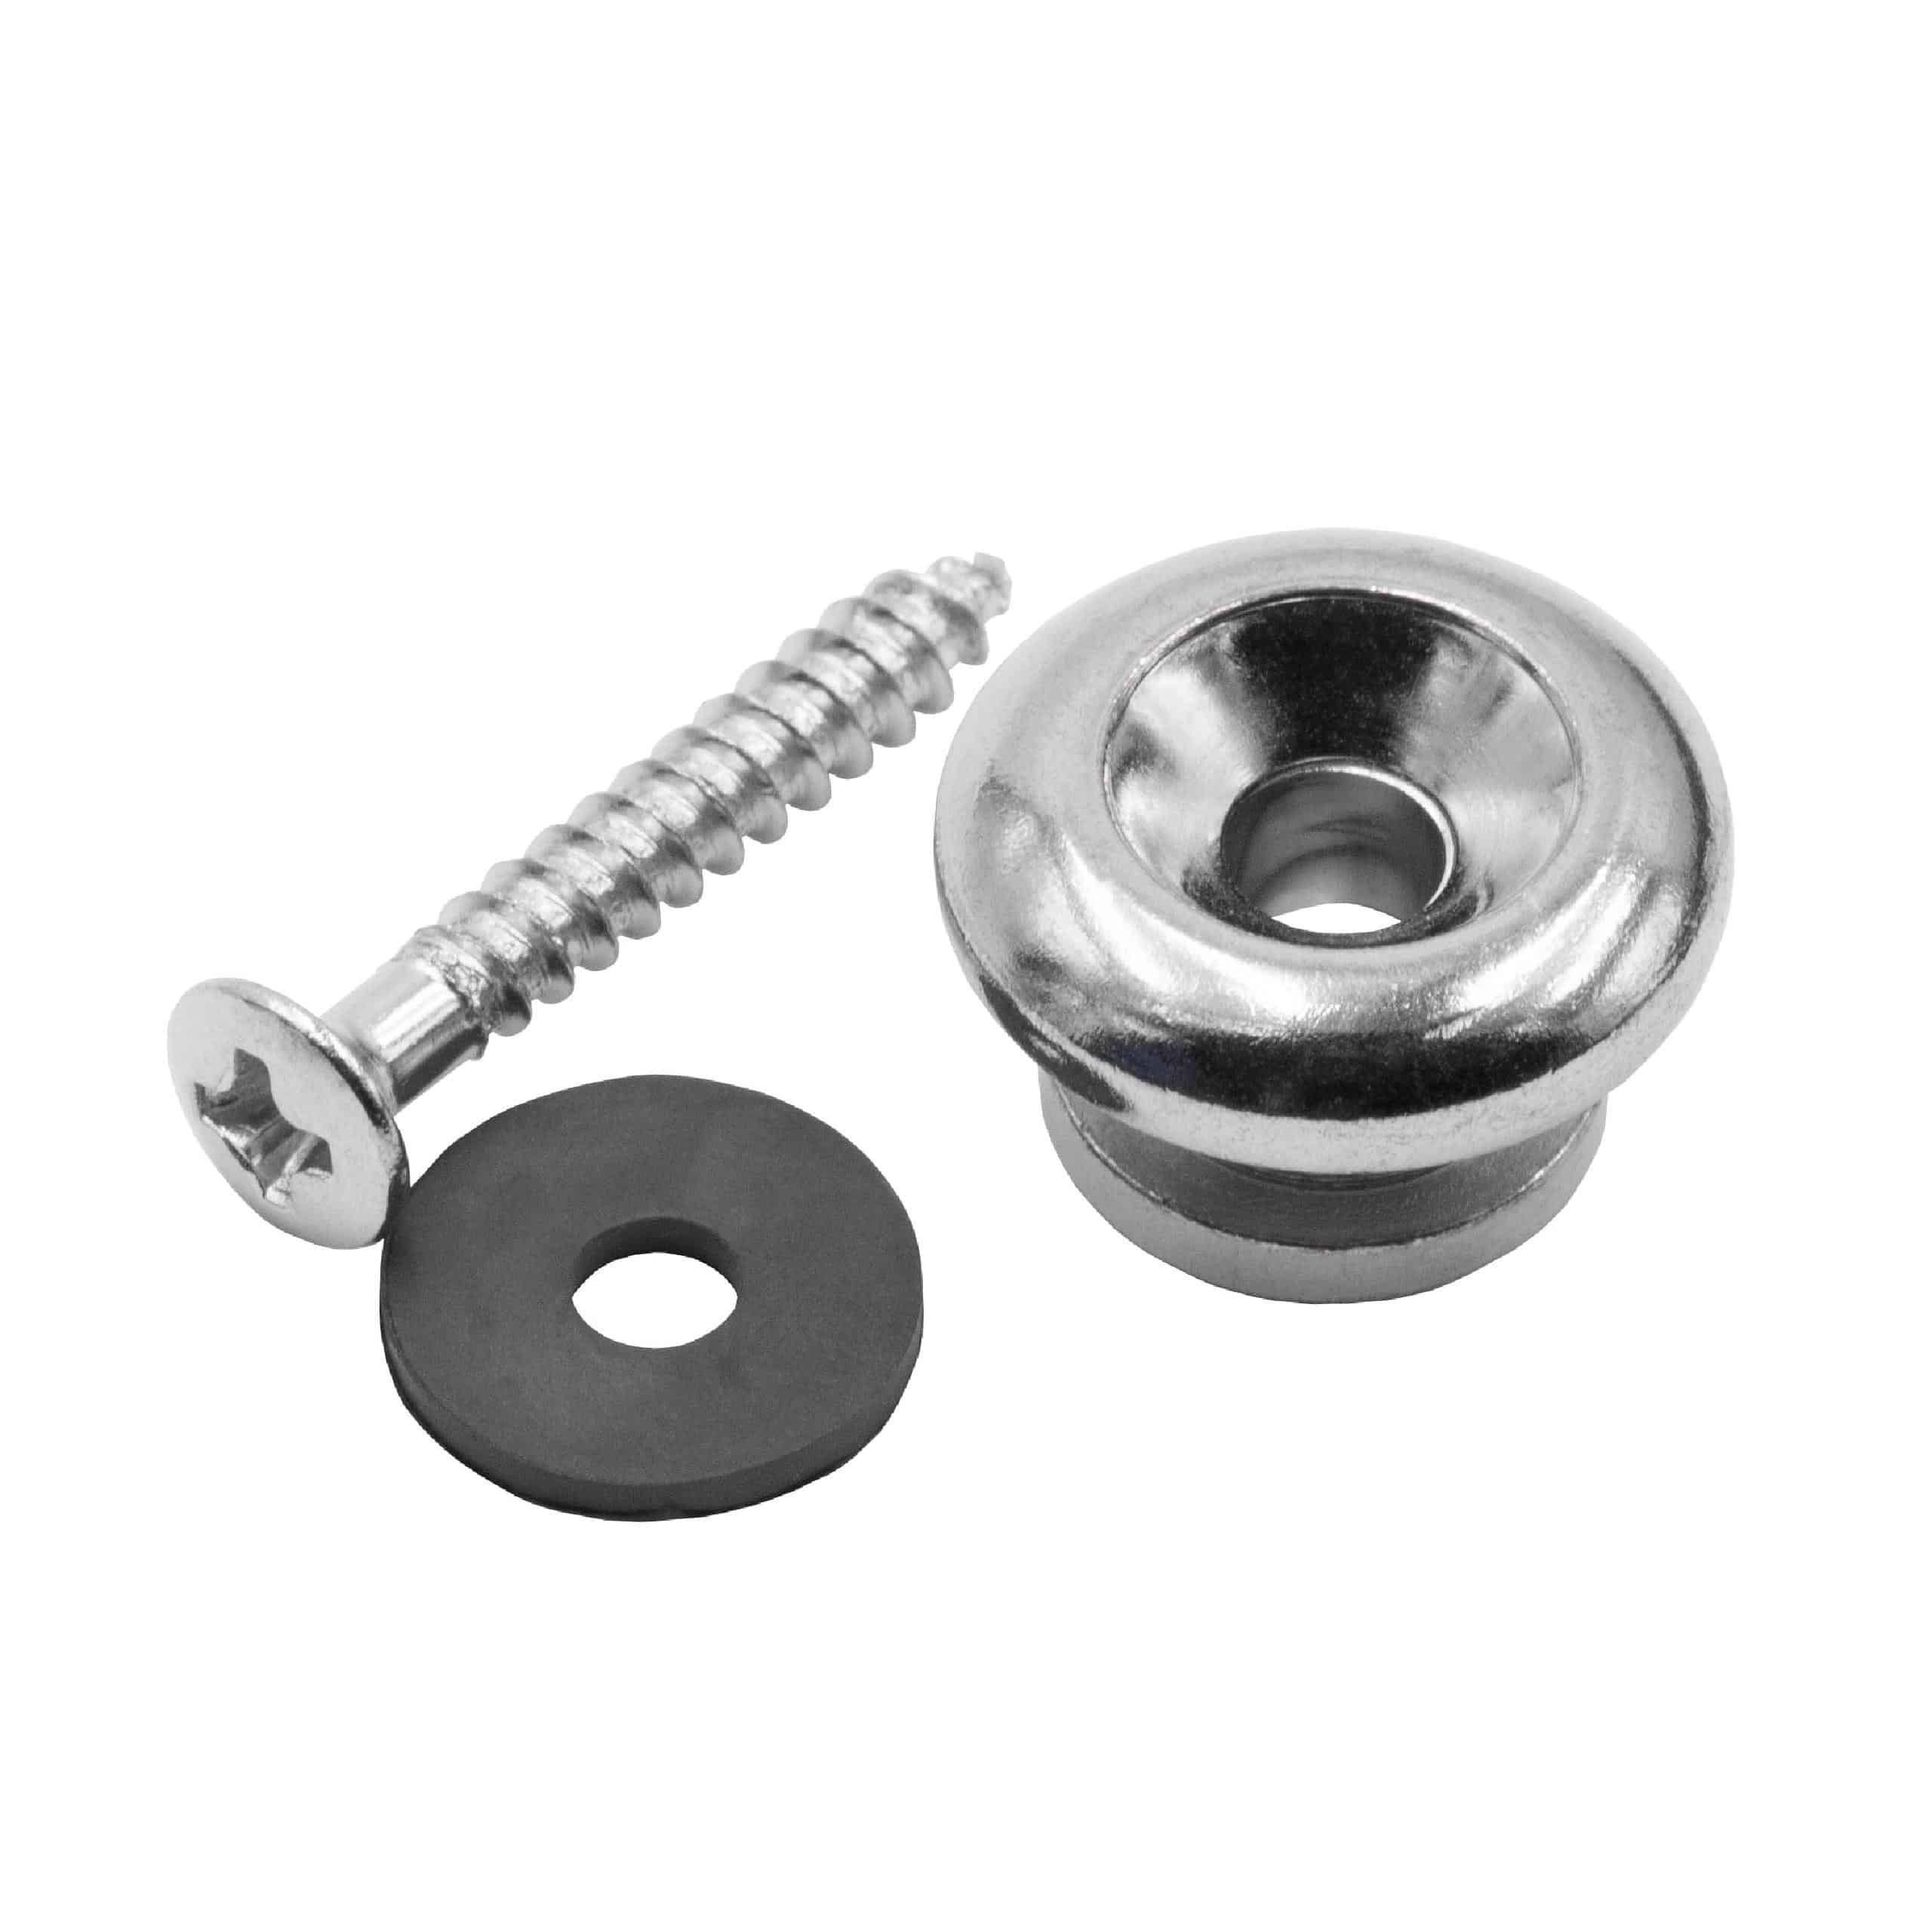  Security Strap Lock Straplock Button Pin Peg for Electric/Acoustic Guitar, Bass; silver, mushroom 